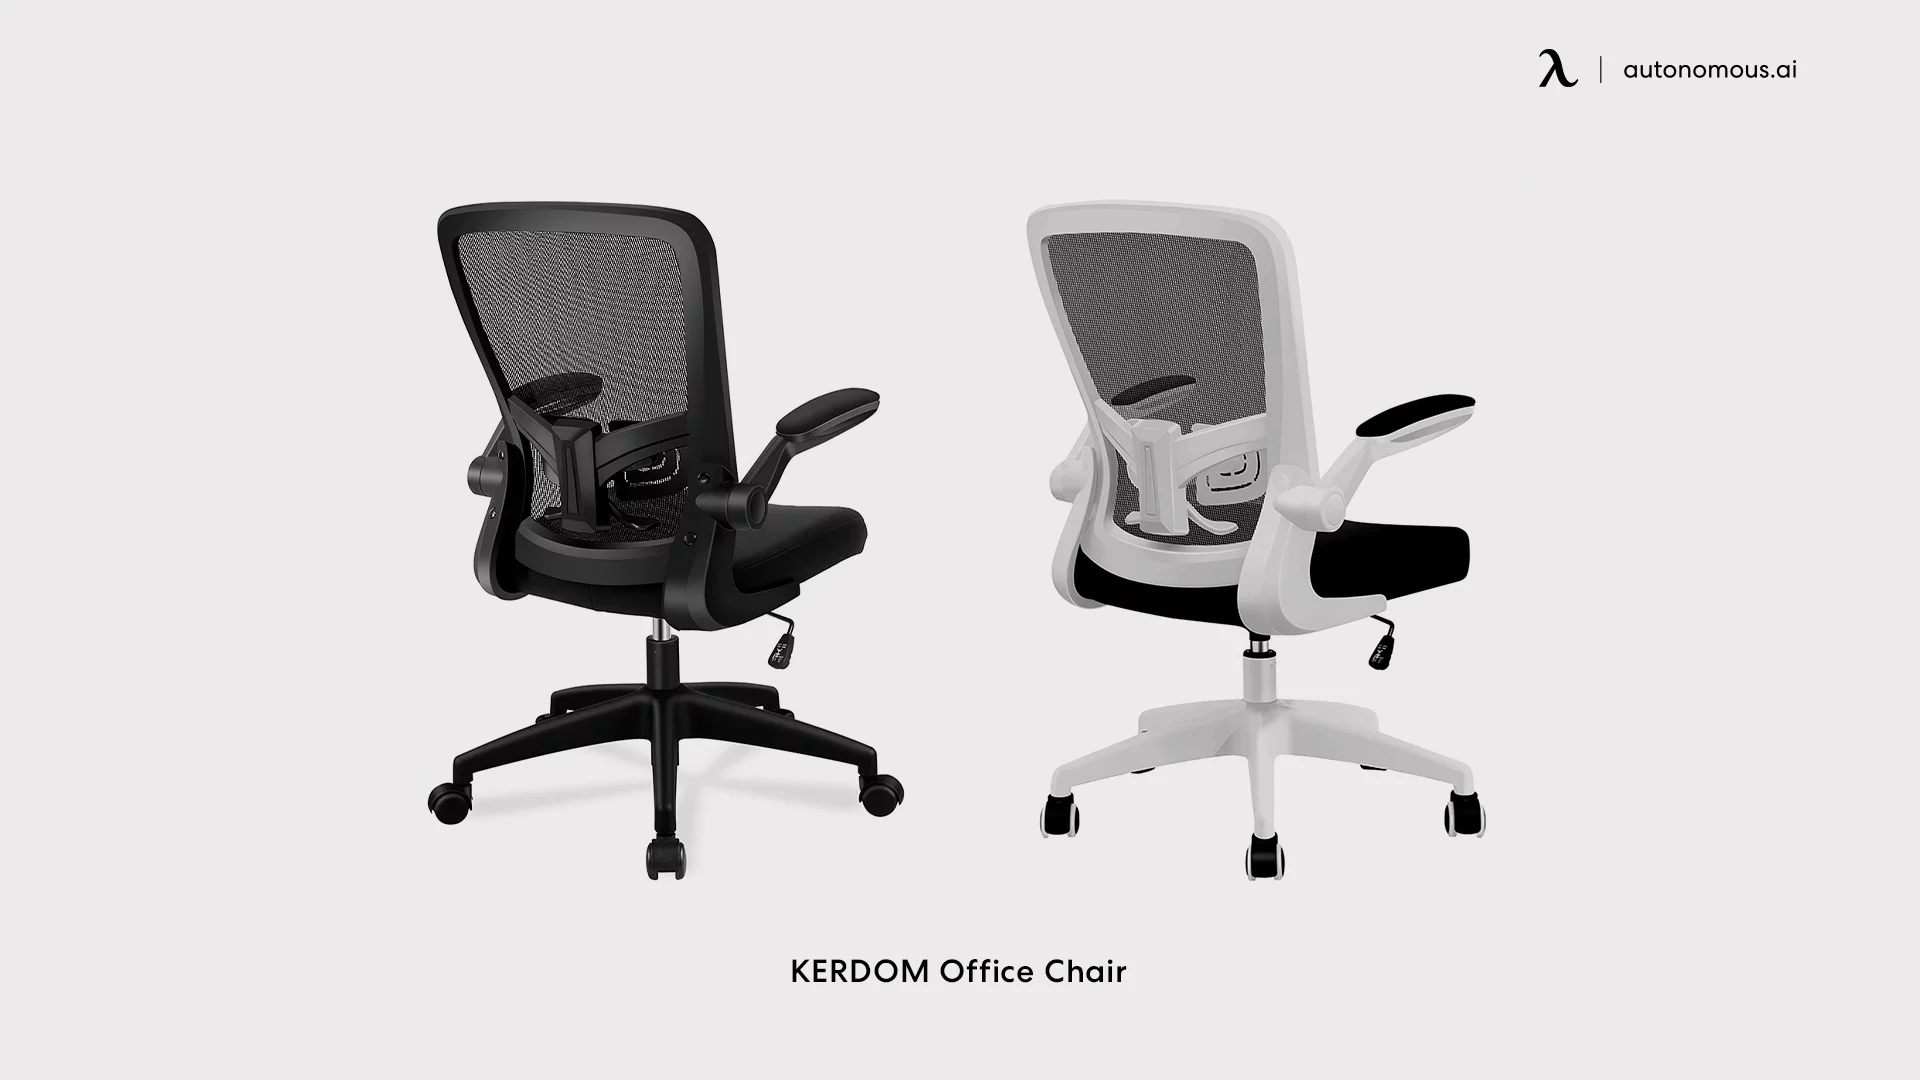 KERDOM Office Chair small home office chair